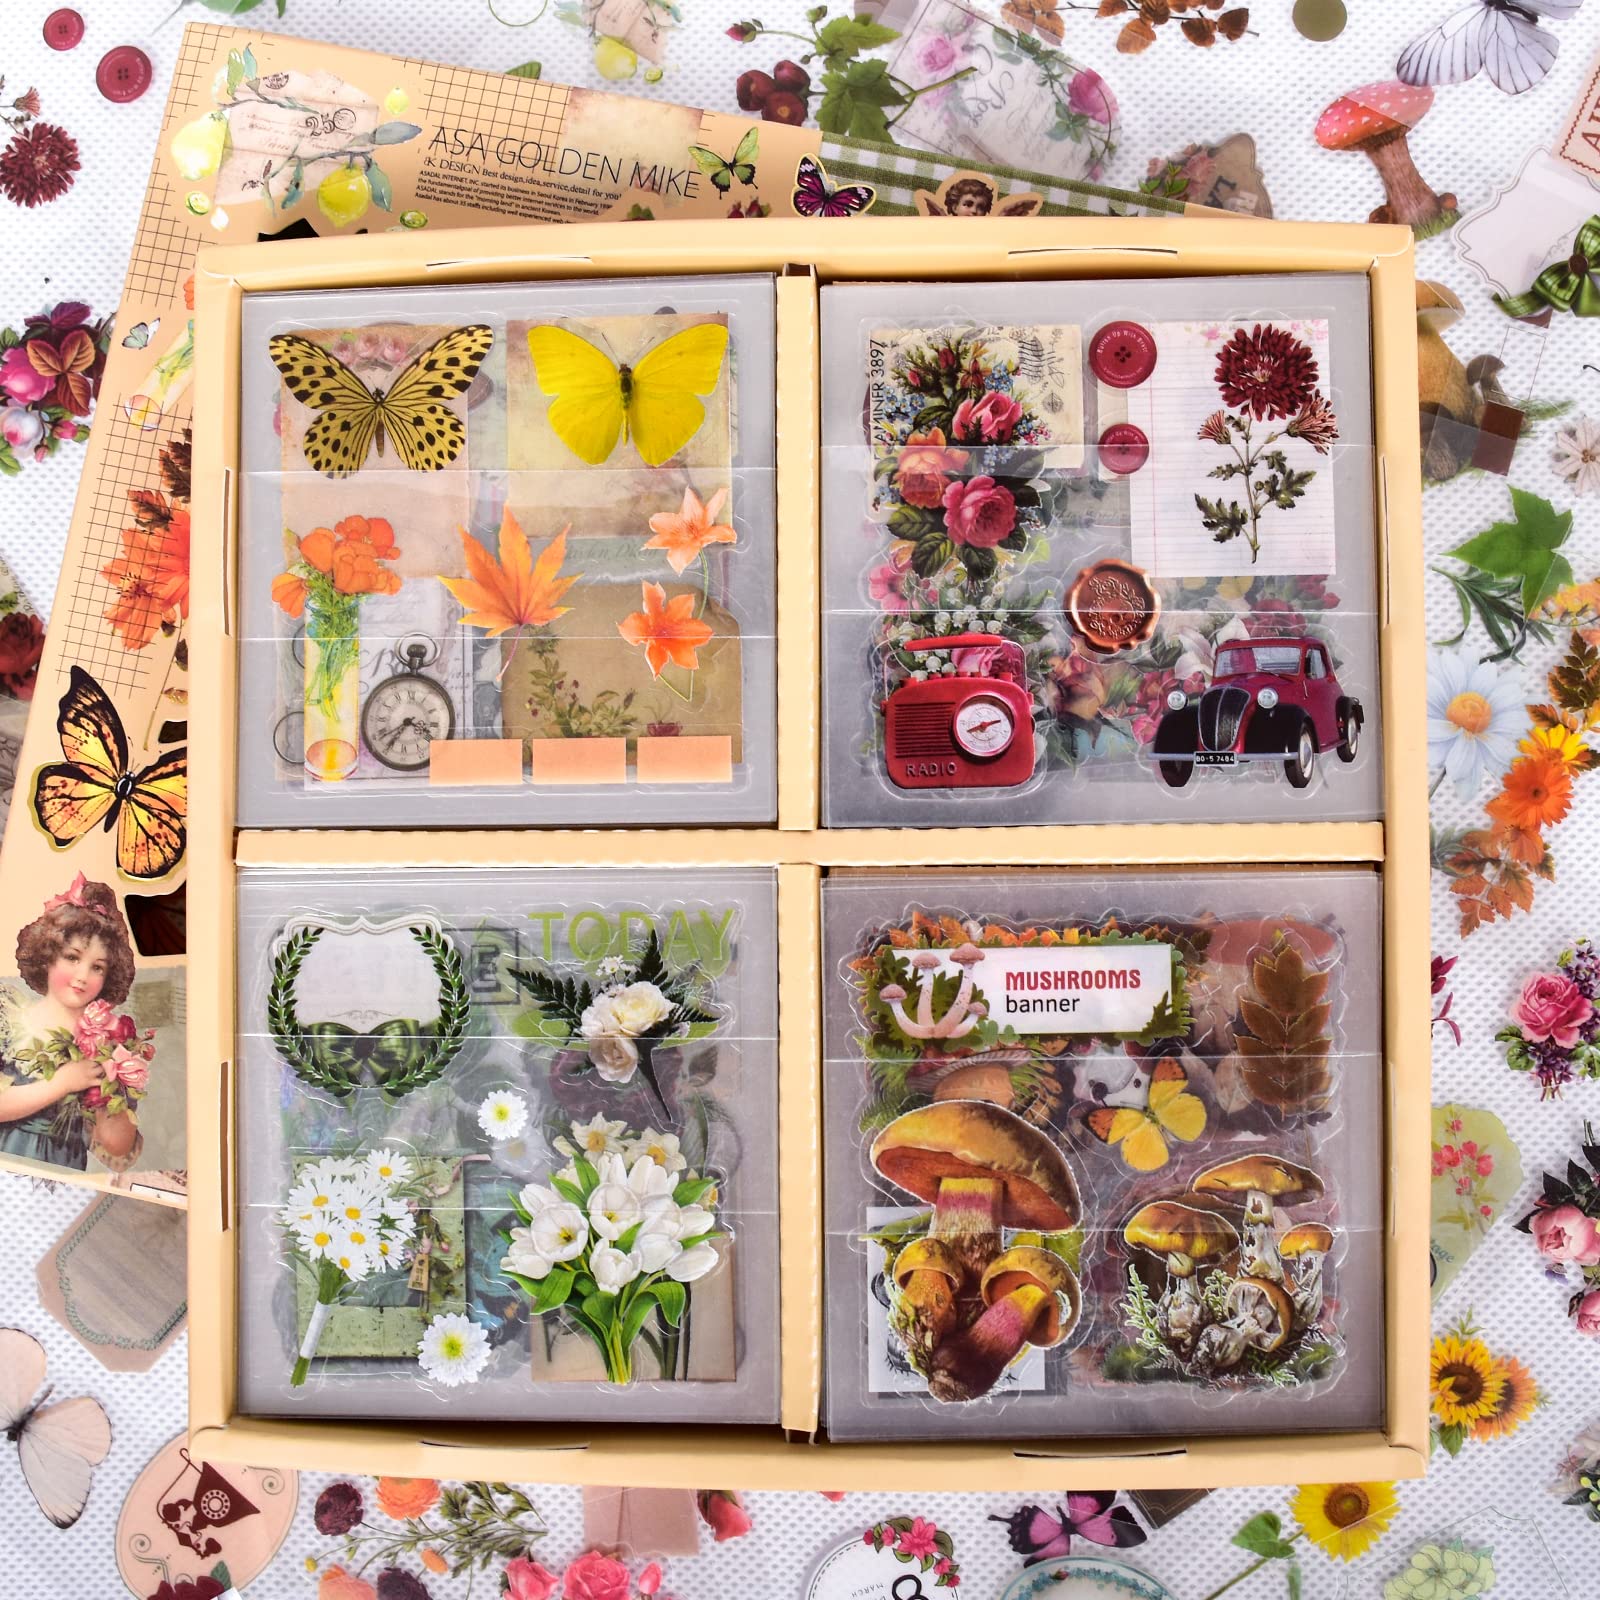 Floral Polaroid Stickers – Mushie Works